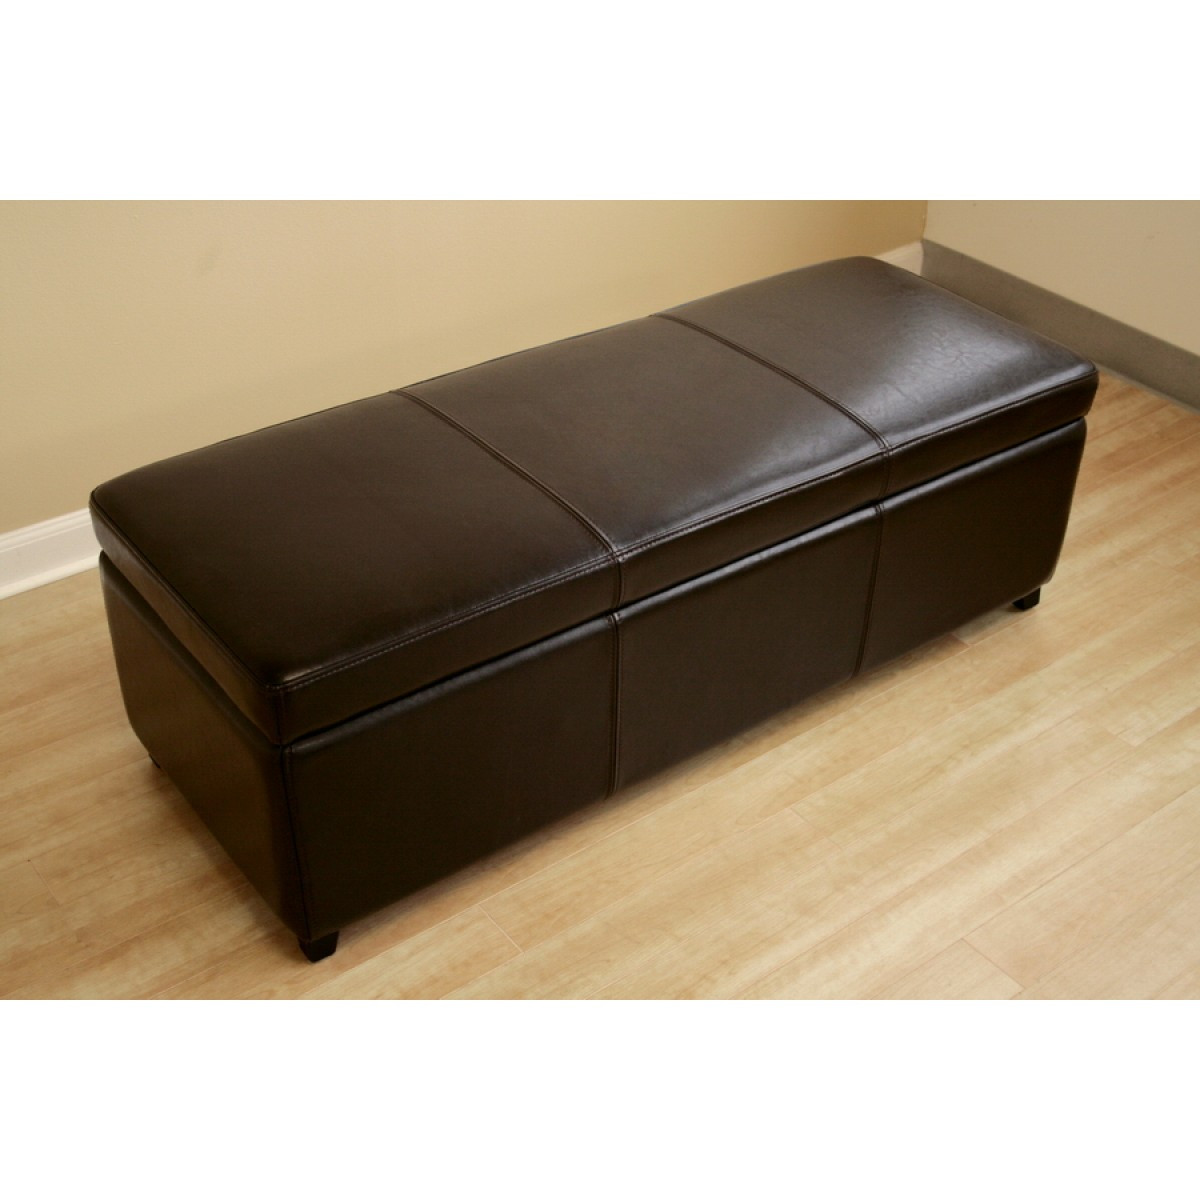 Leather Bench With Storage
 Dark Brown Full Leather Storage Bench Ottoman with